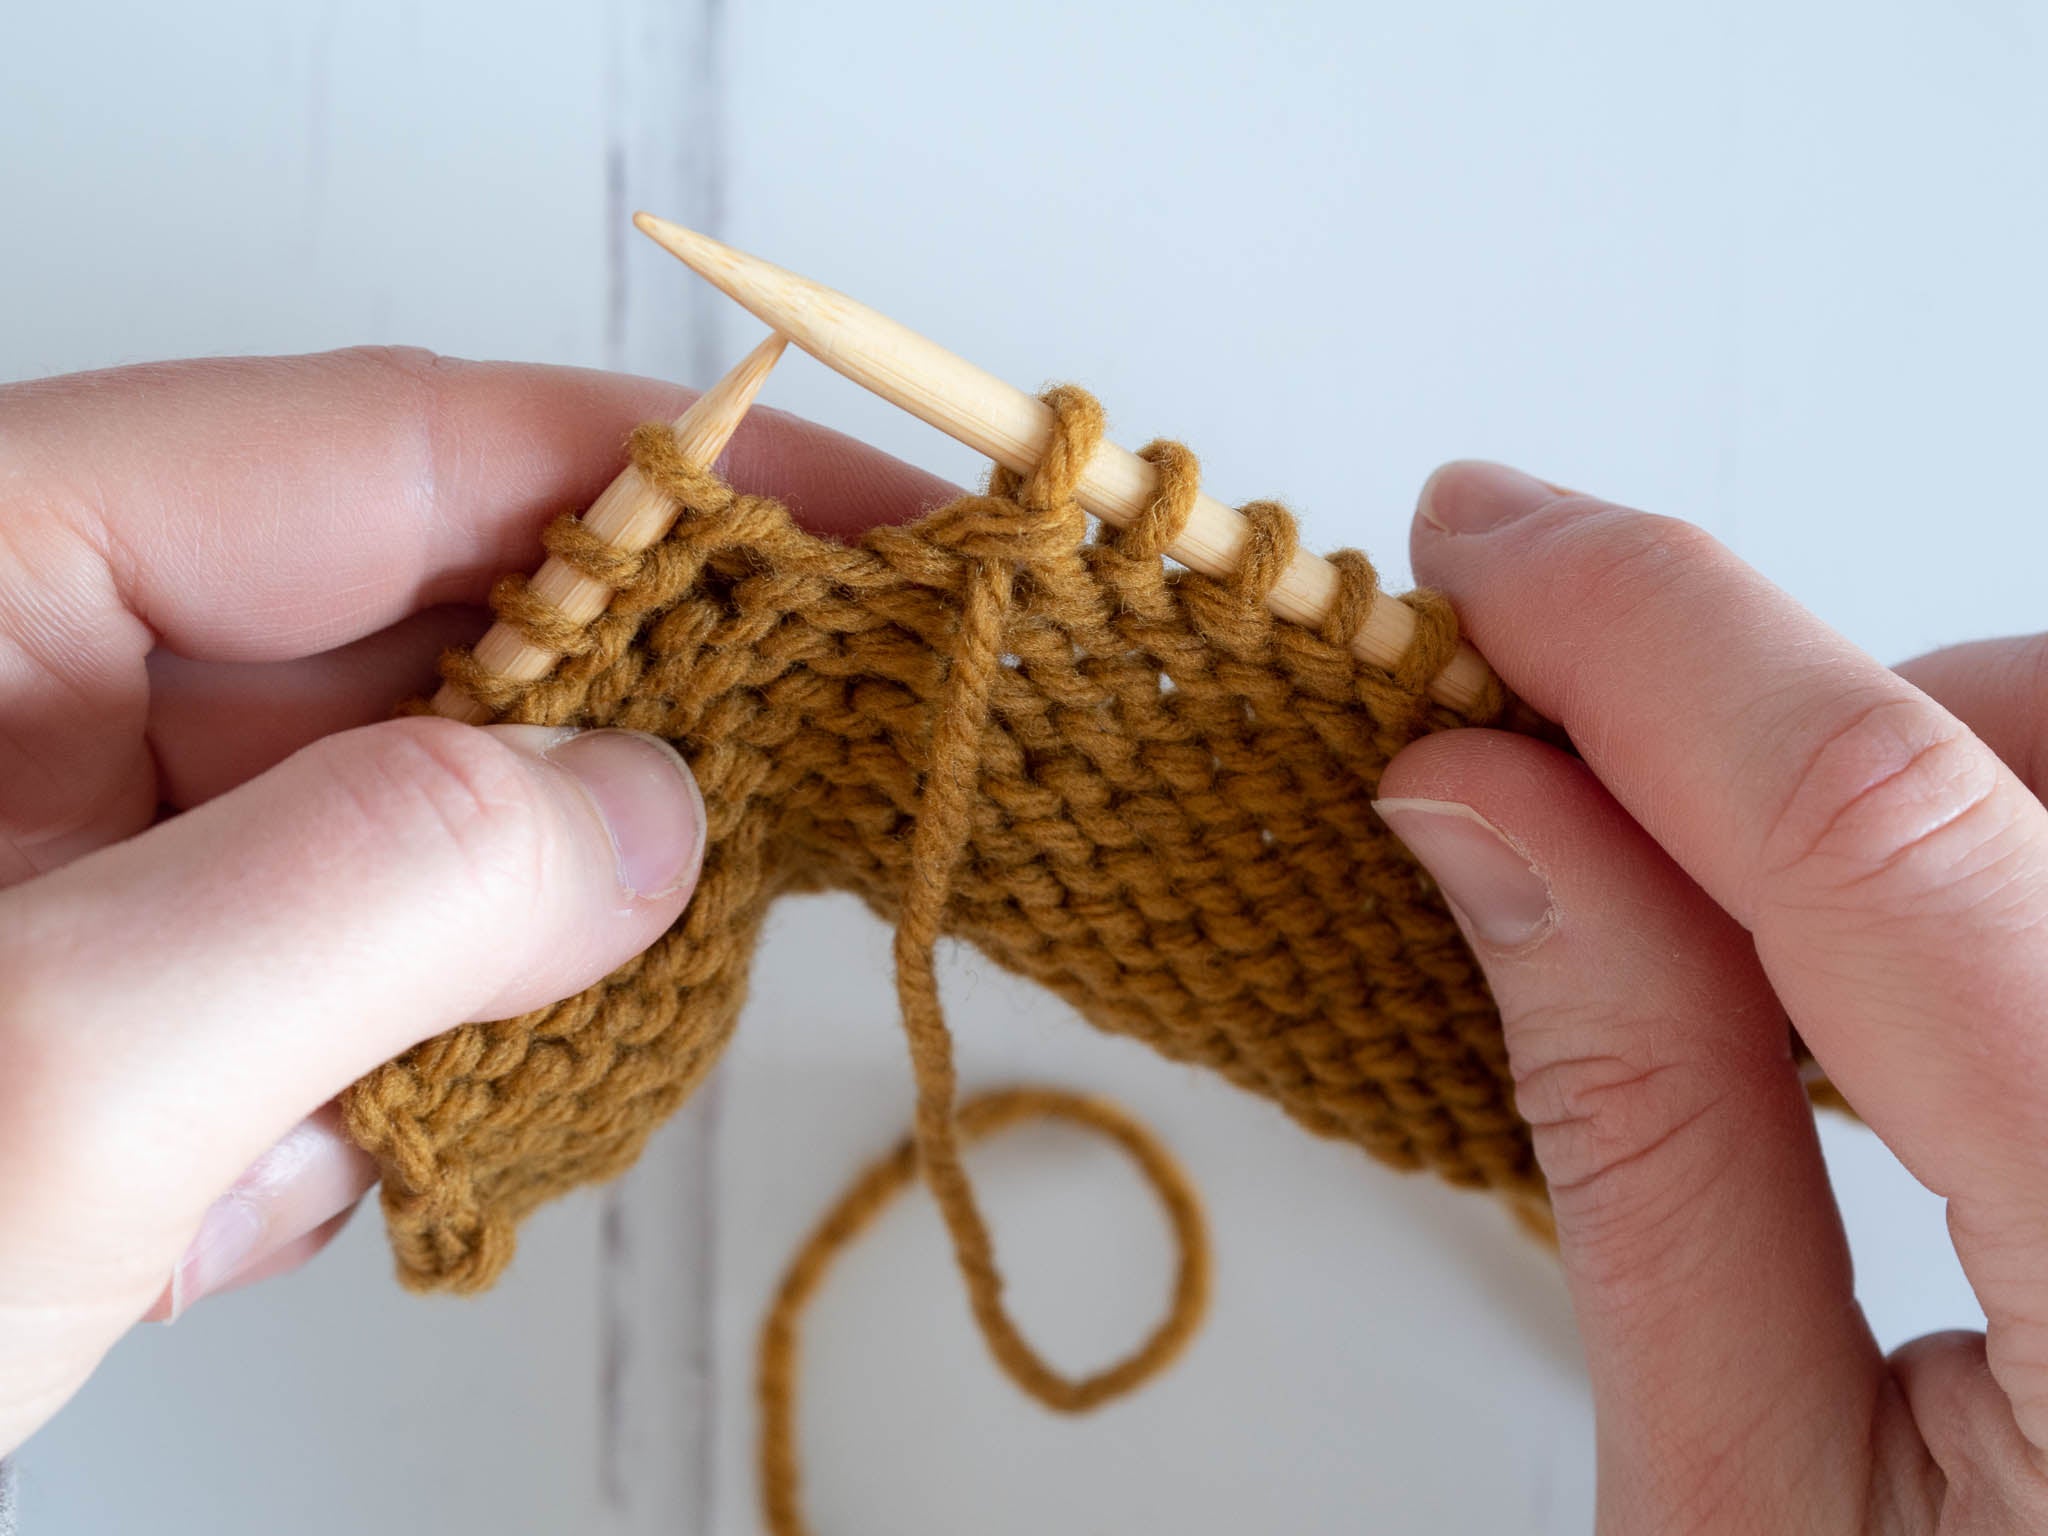 How to Tell if it was a Knit or Purl? – Cushion of Joy